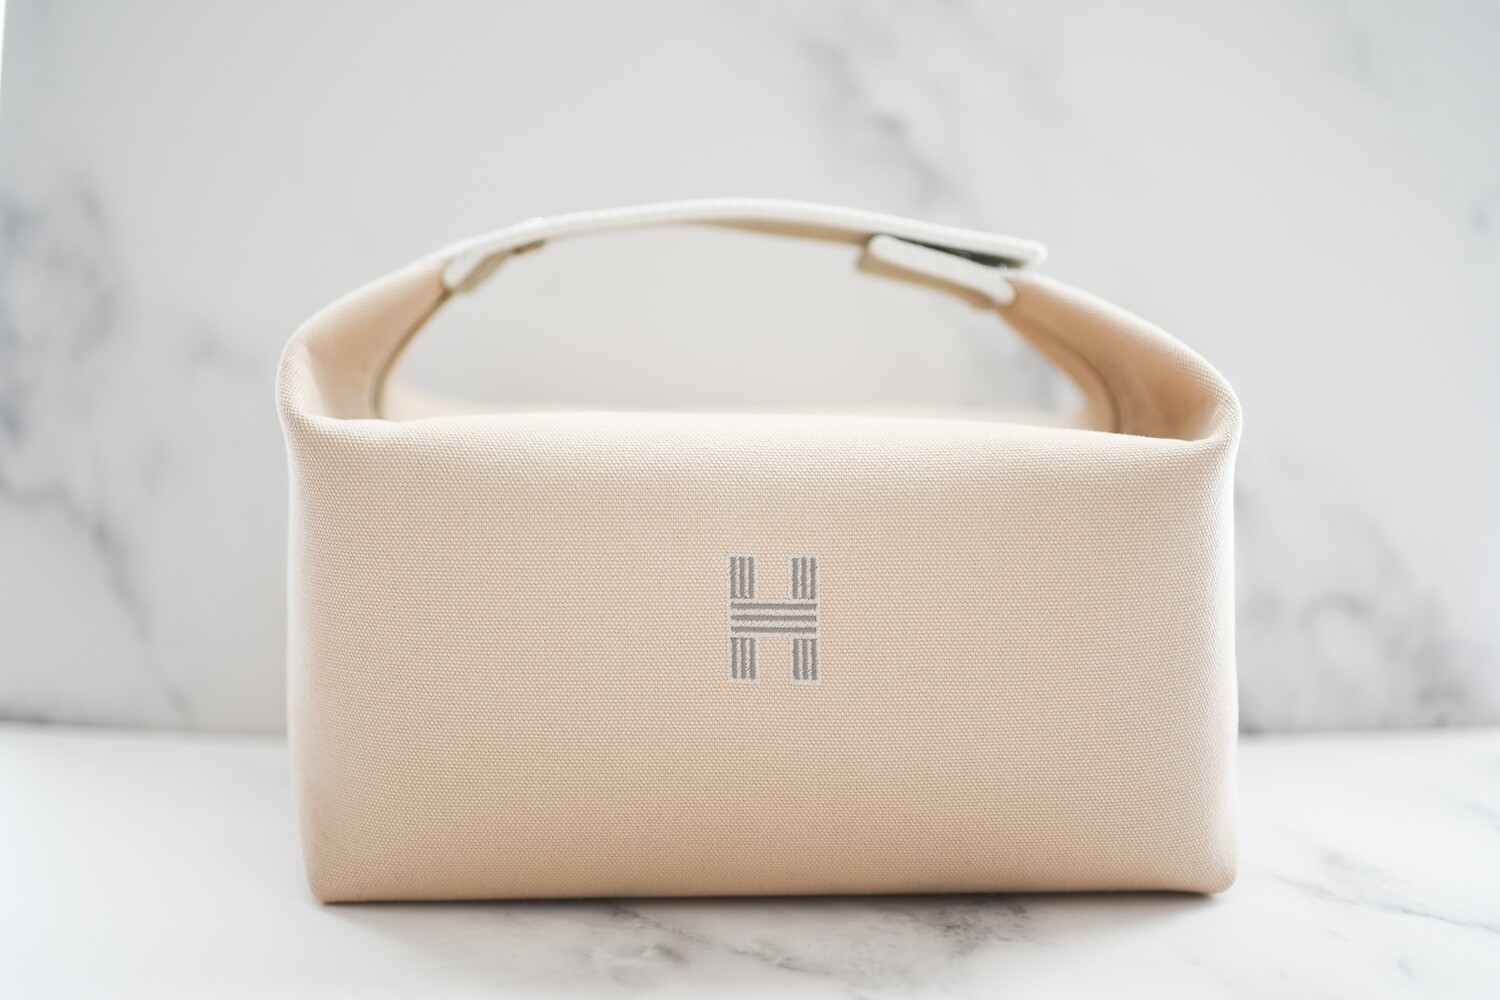 We have another Hermes Bride A Brac available! - large size - 9.8/10